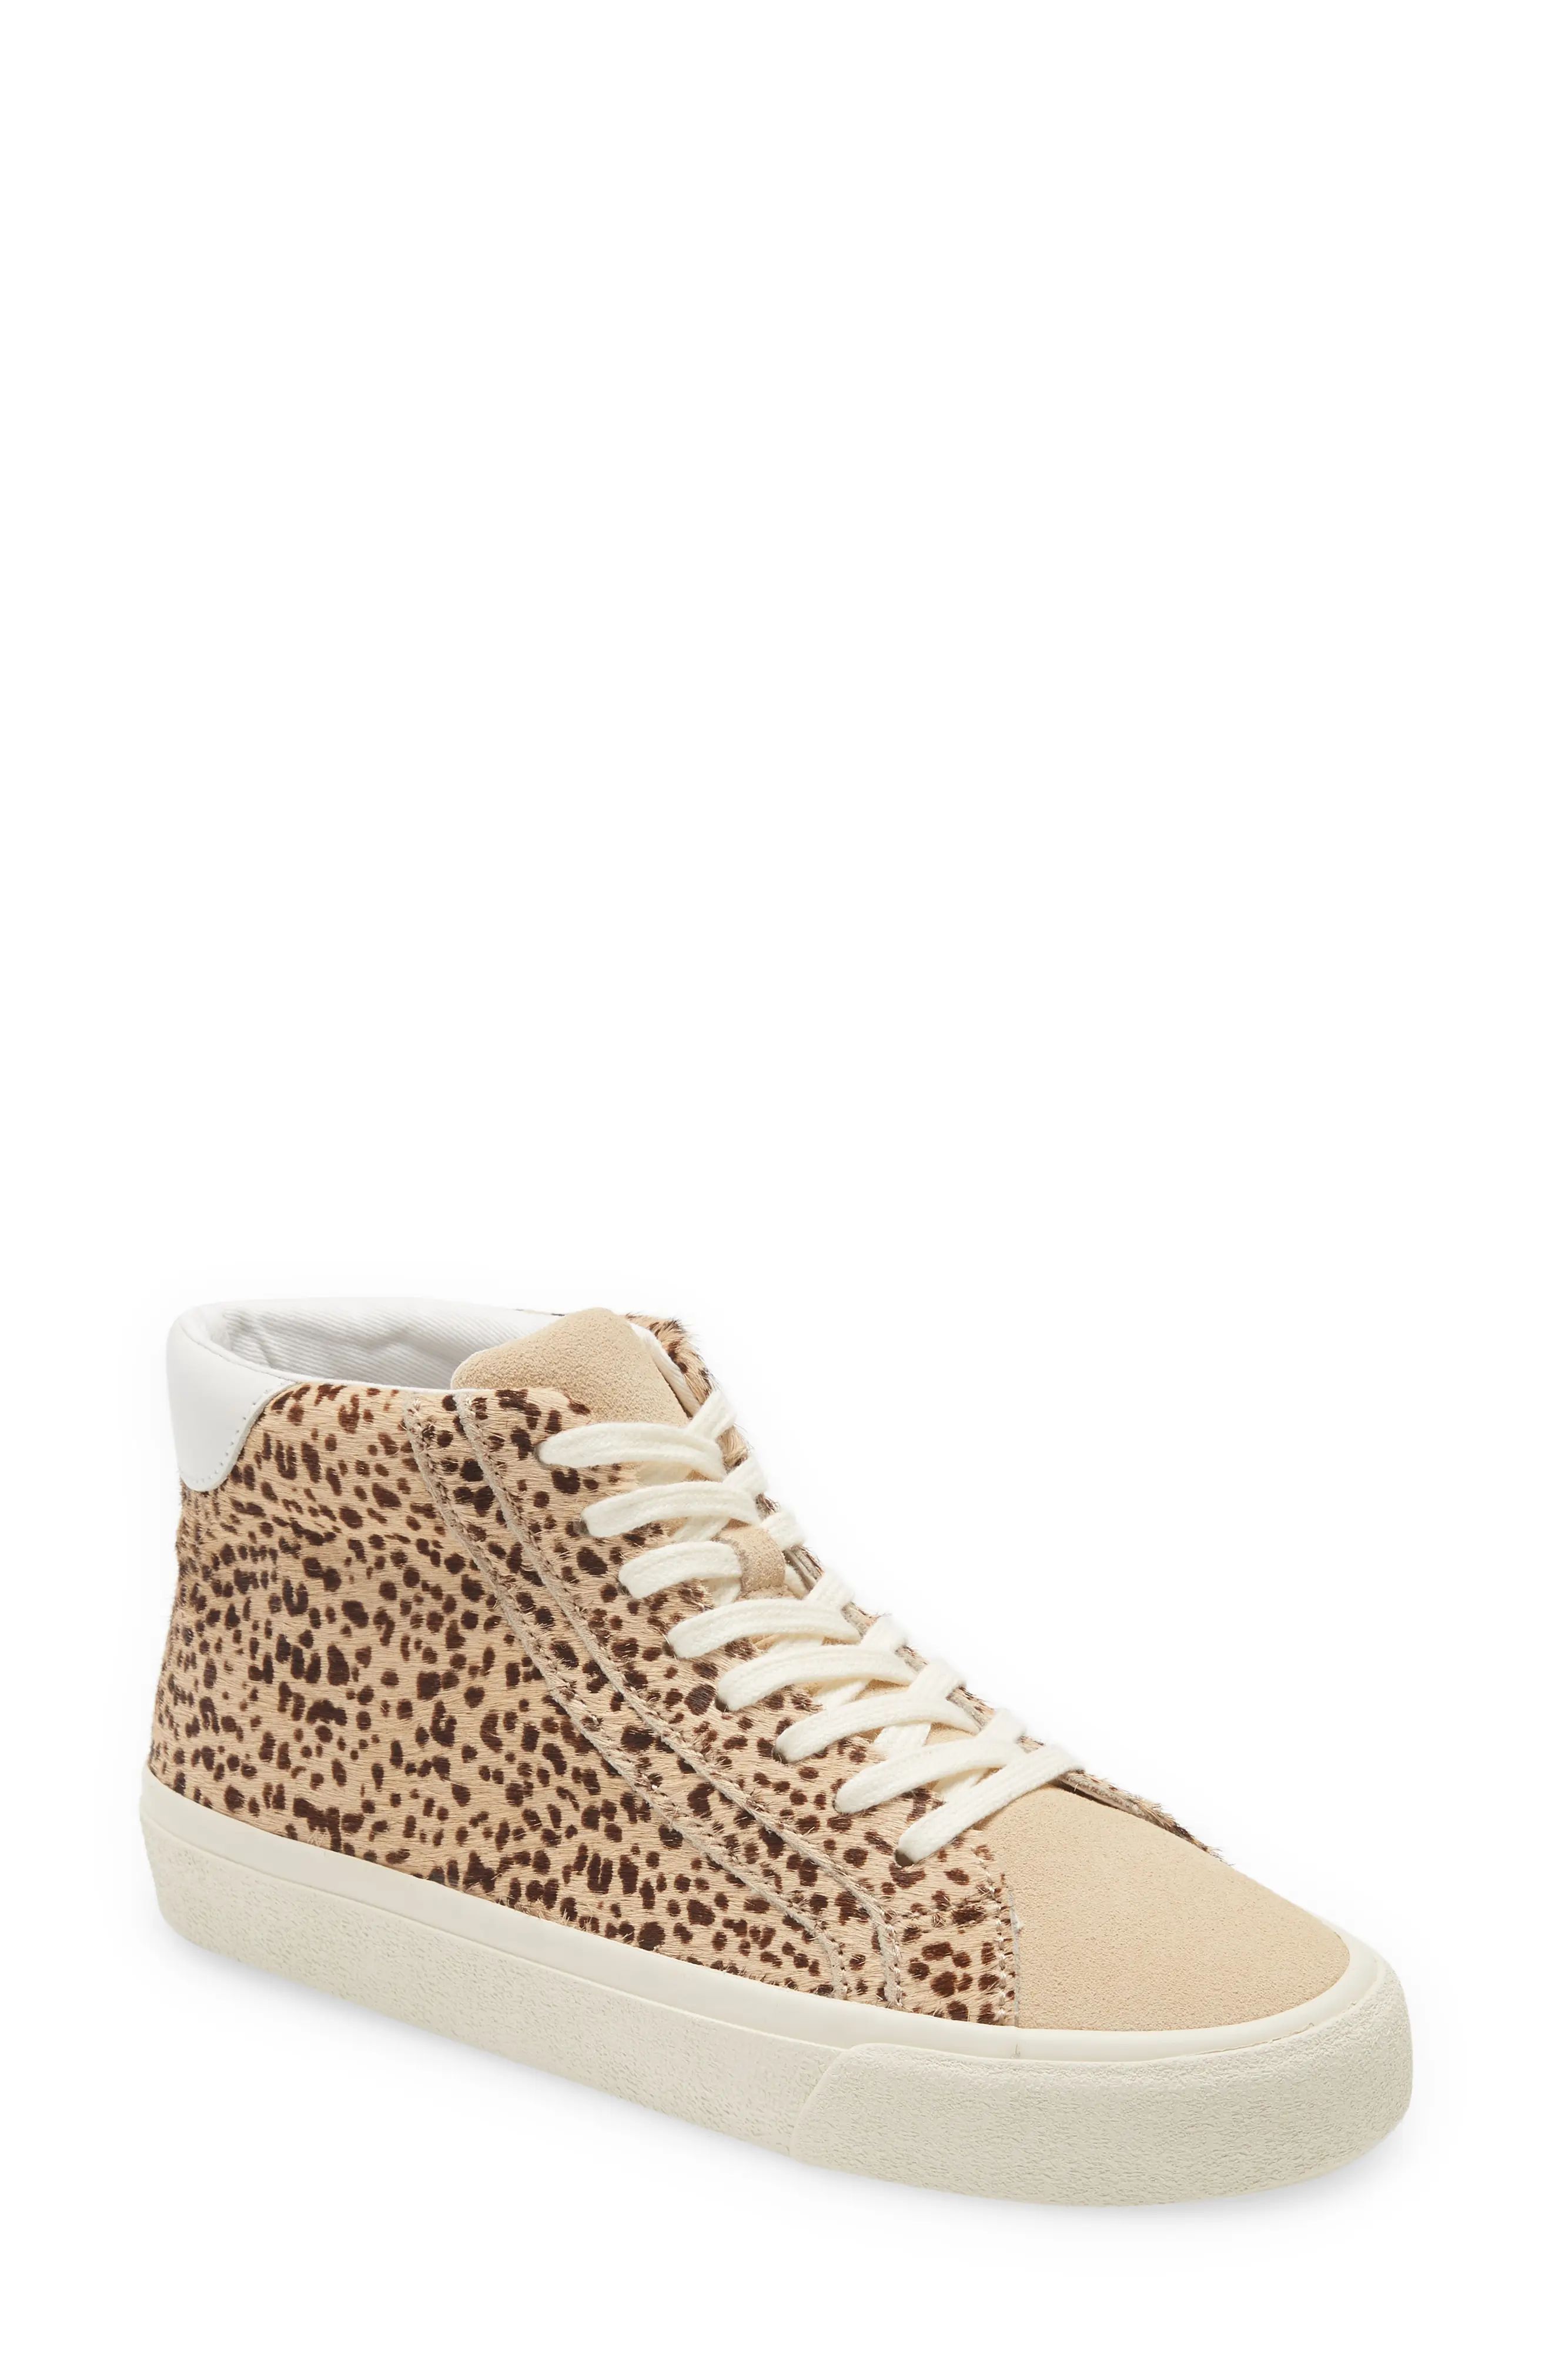 Madewell Sidewalk Spotted Genuine Calf Hair High Top Sneaker in French Vanilla Multi Calf Hair at No | Nordstrom